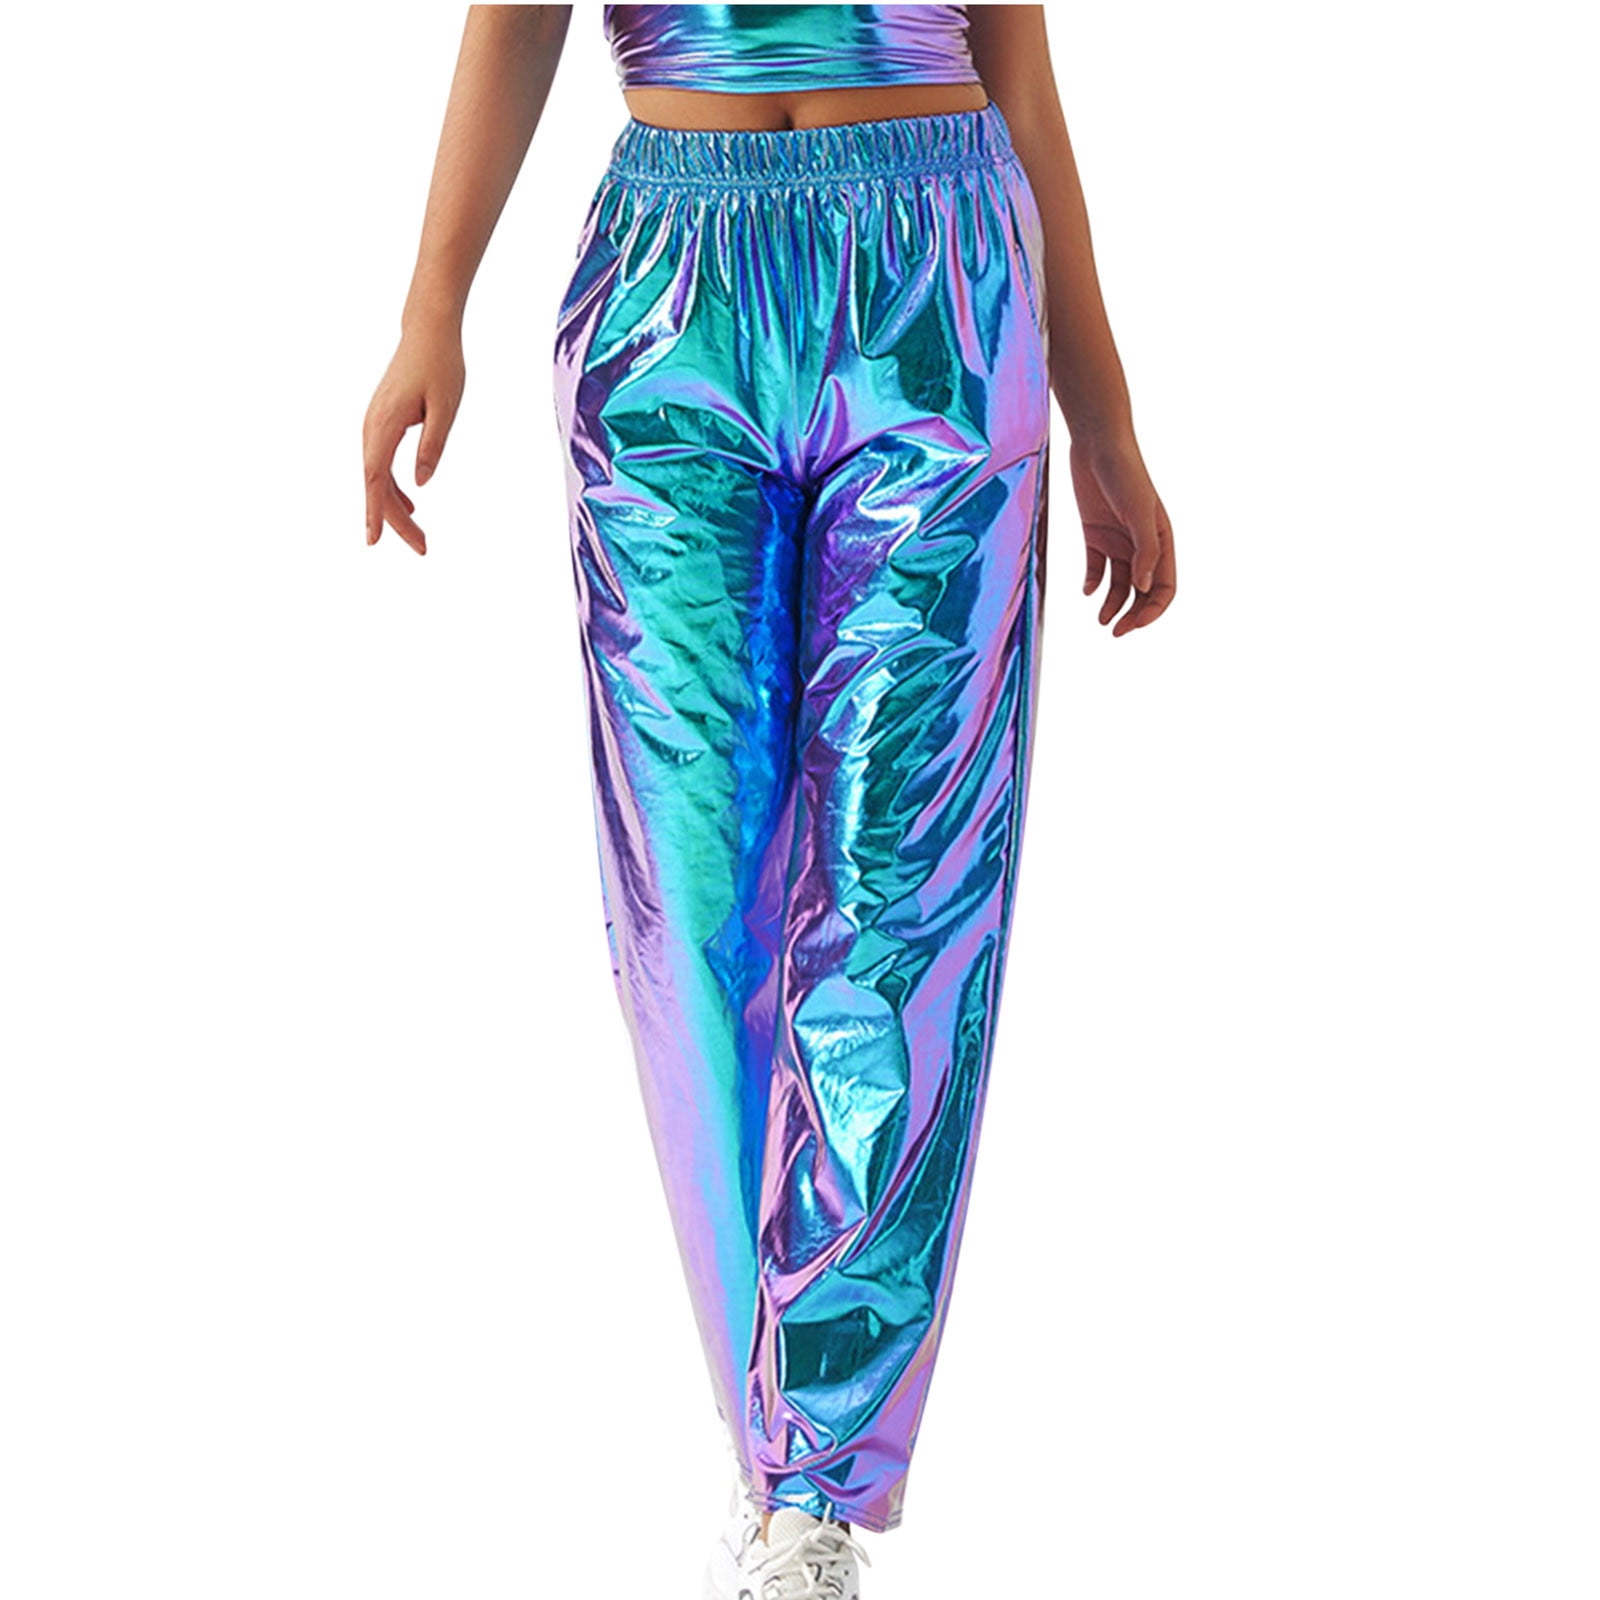 Metallic Blue and Avatar Mid-rise Leggings Pants Rave, Festival, EDM, 80s  Clothing High Waisted Funky -  Canada